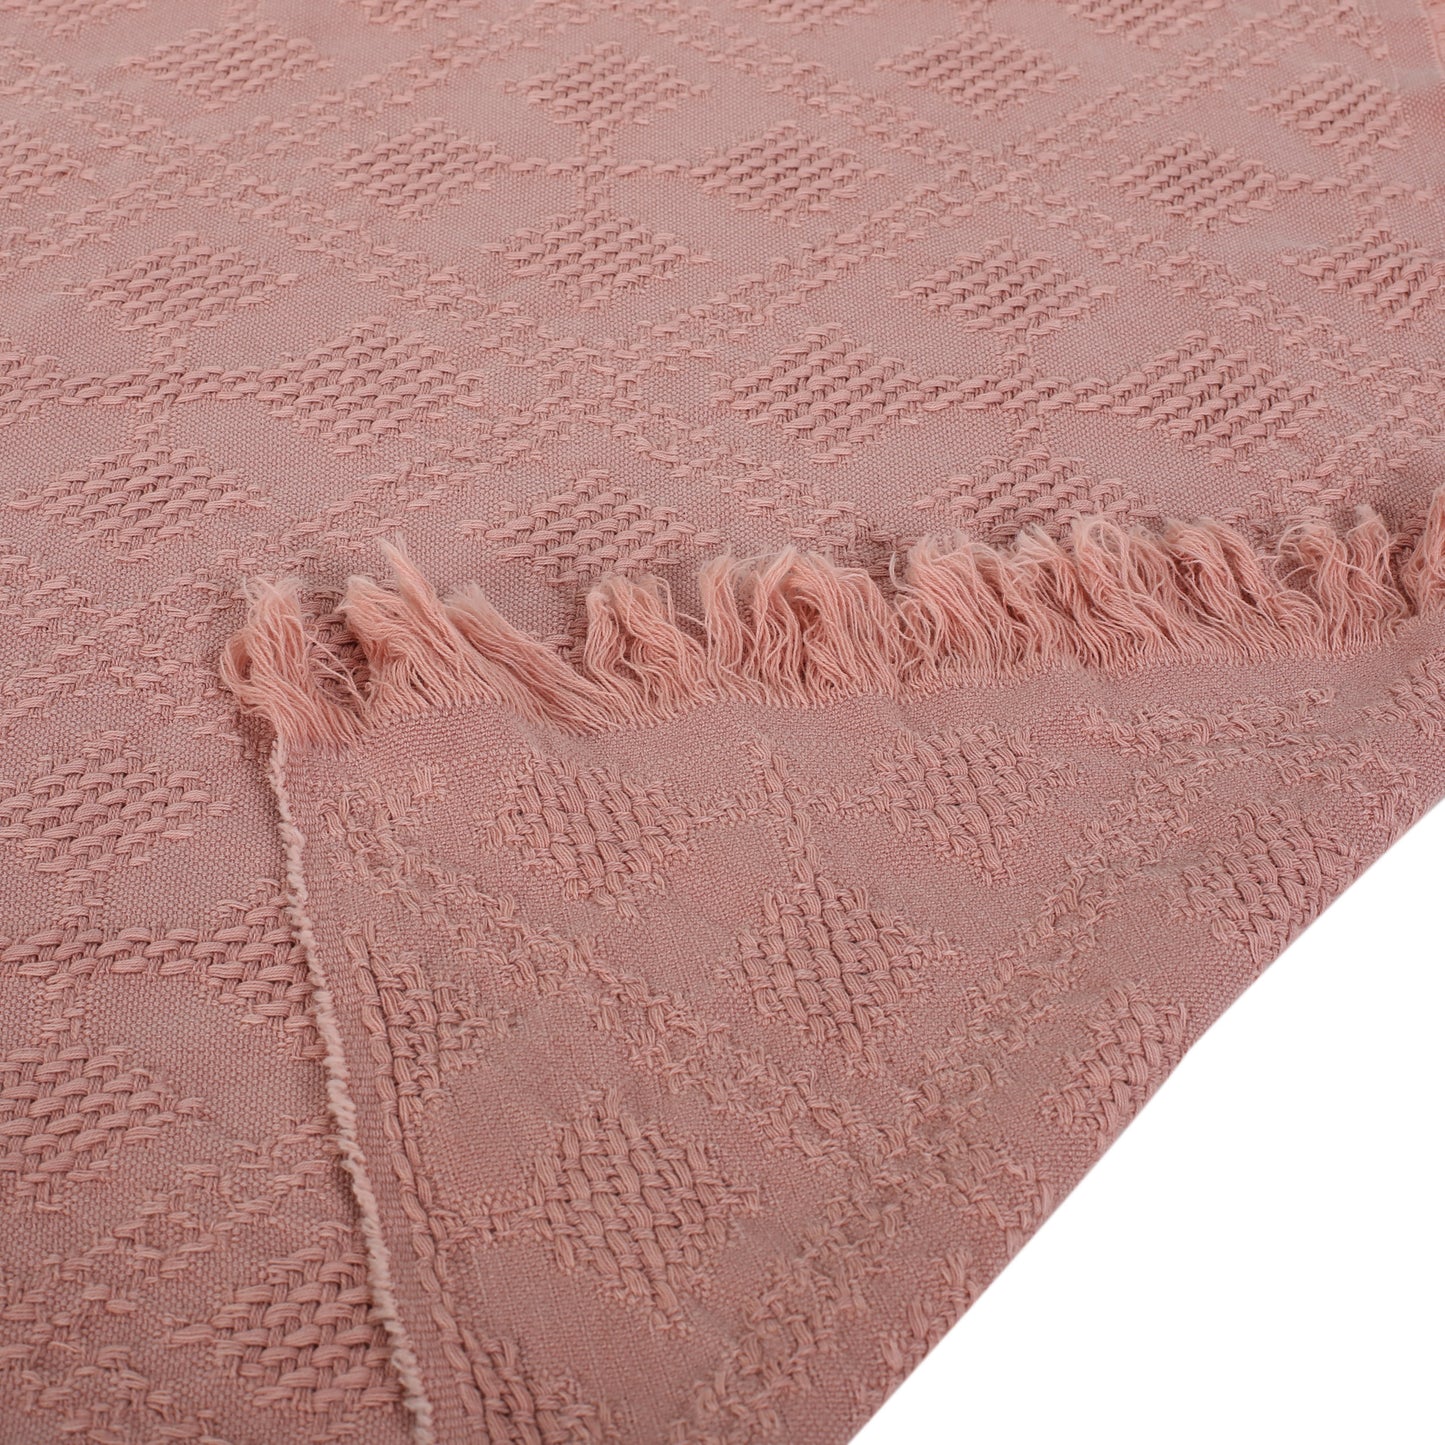 Fontana Contemporary Cotton Throw Blanket with Fringes, Dusty Pink